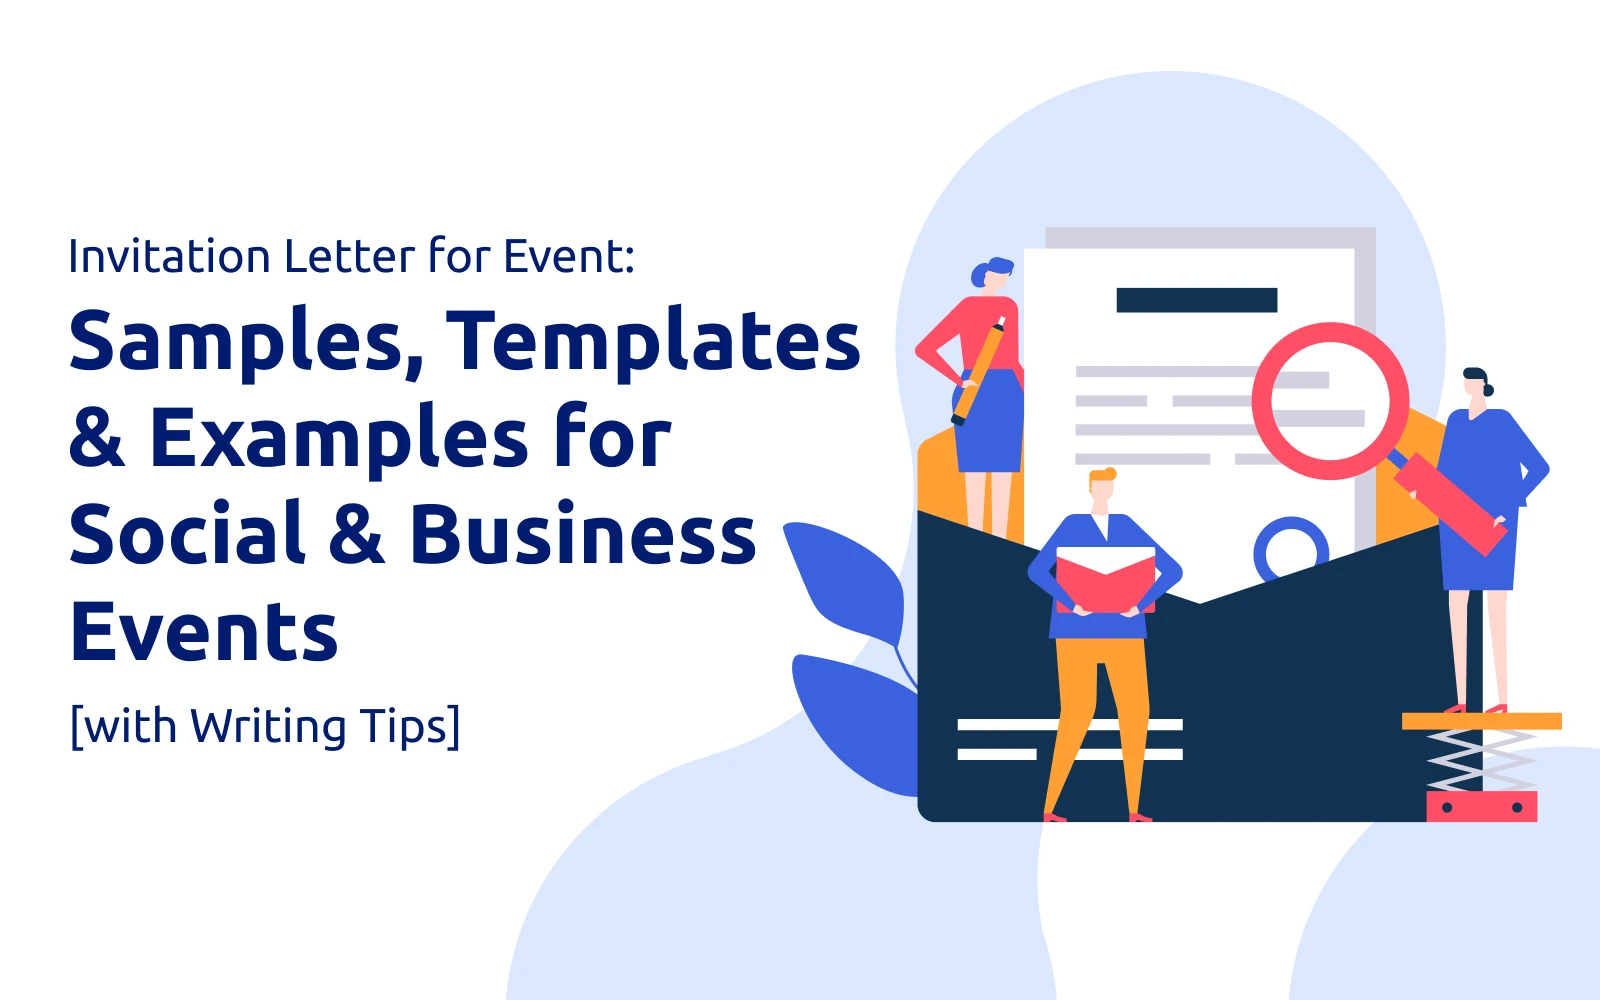 Invitation Letter for Event: Samples, Templates & Examples for Social & Business Events [with Writing Tips]